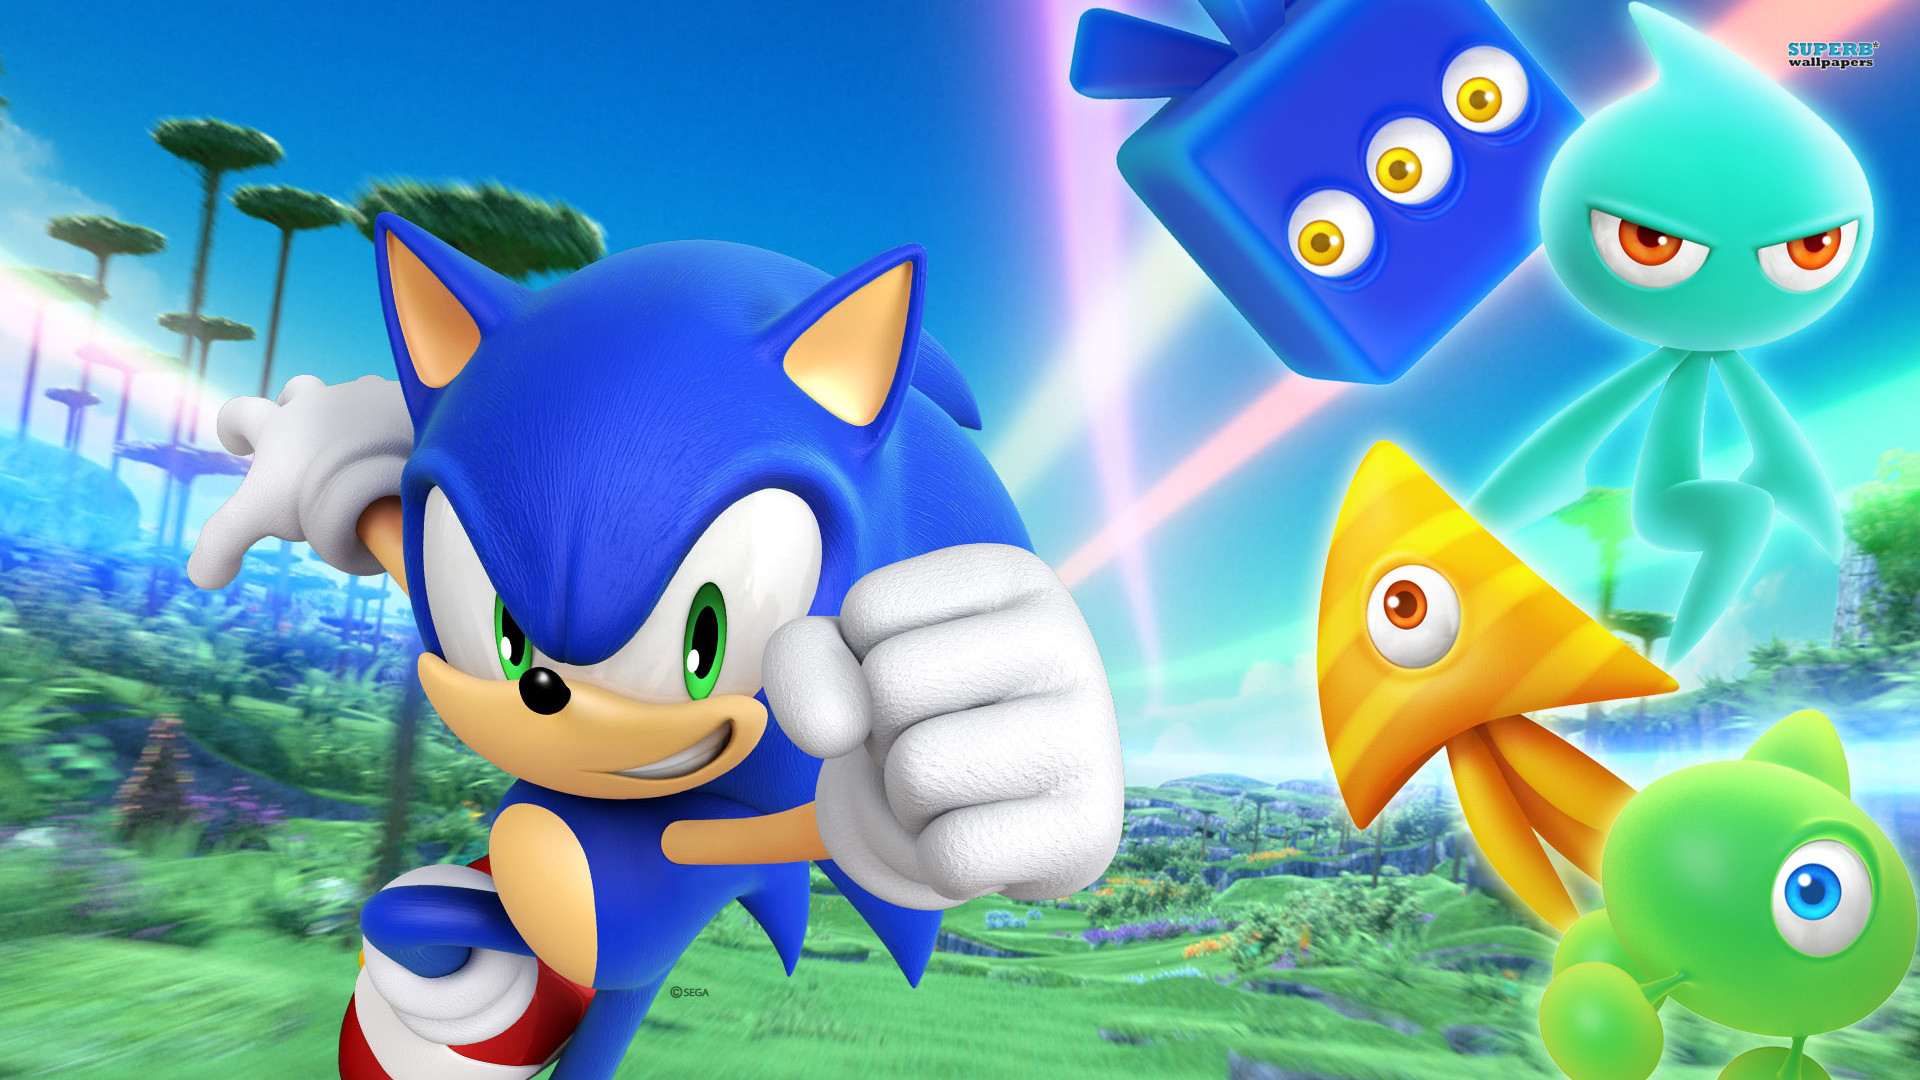 1920x1080 images of sonic the hedgehog game | Sonic the Hedgehog wallpaper 